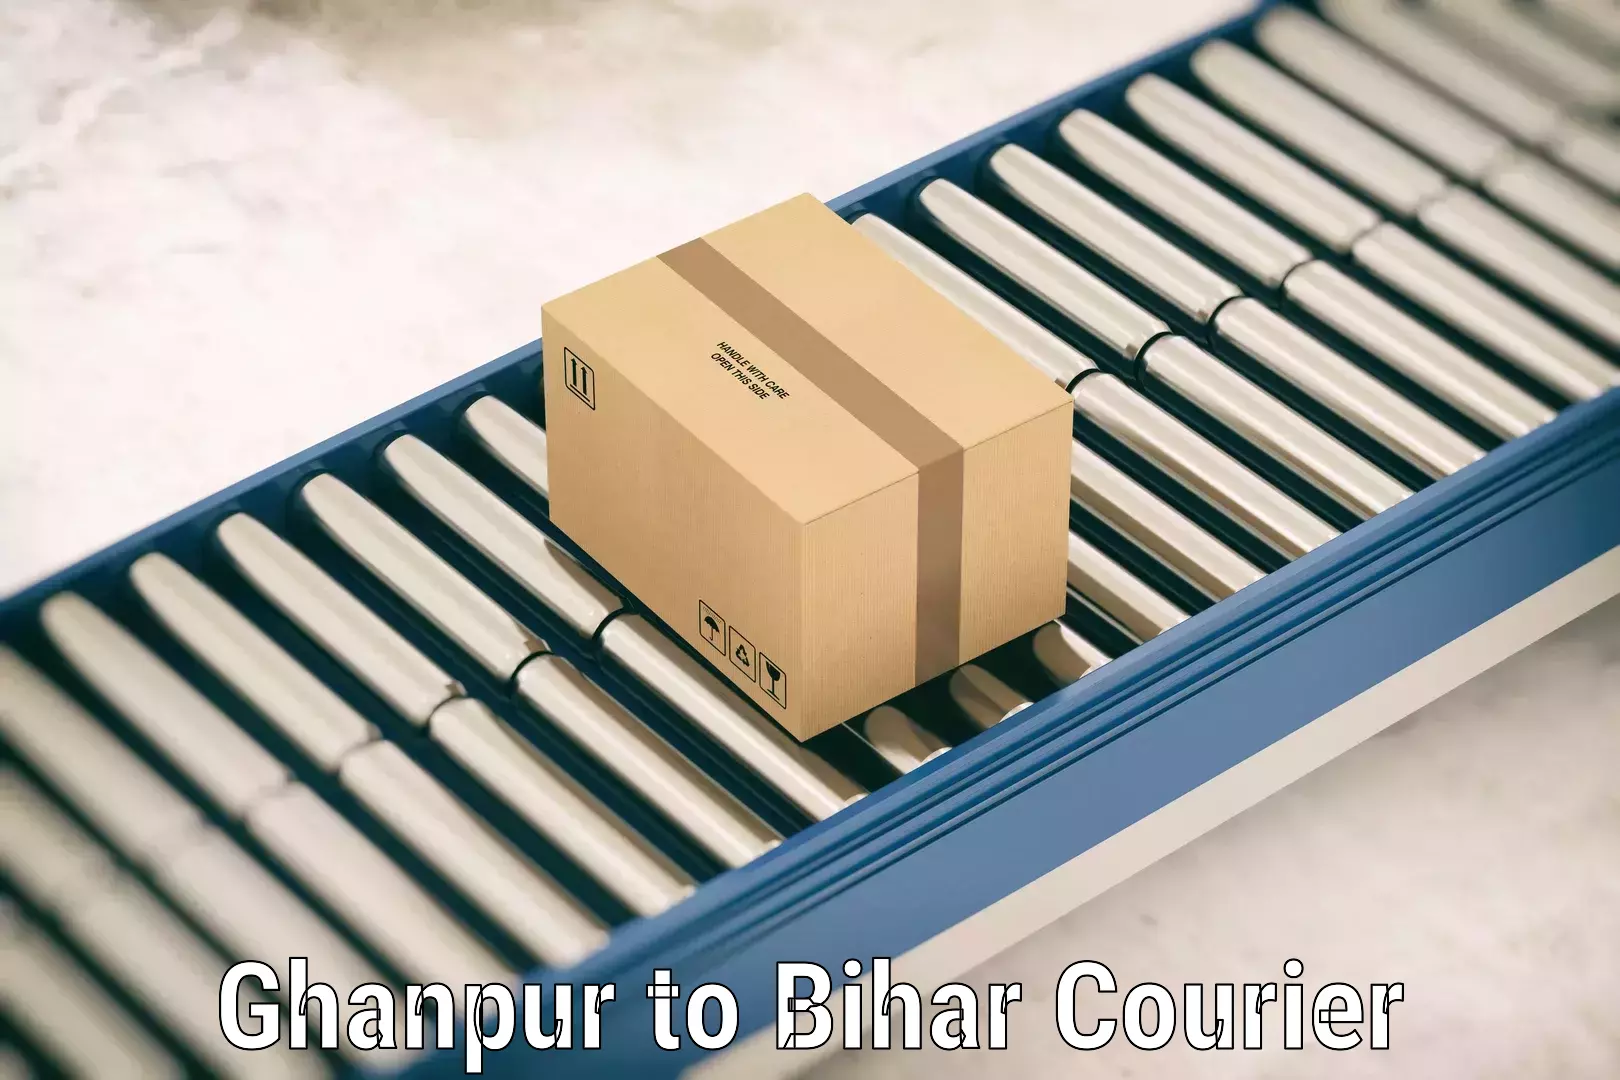 Instant baggage transport quote Ghanpur to Simrahi Bazar